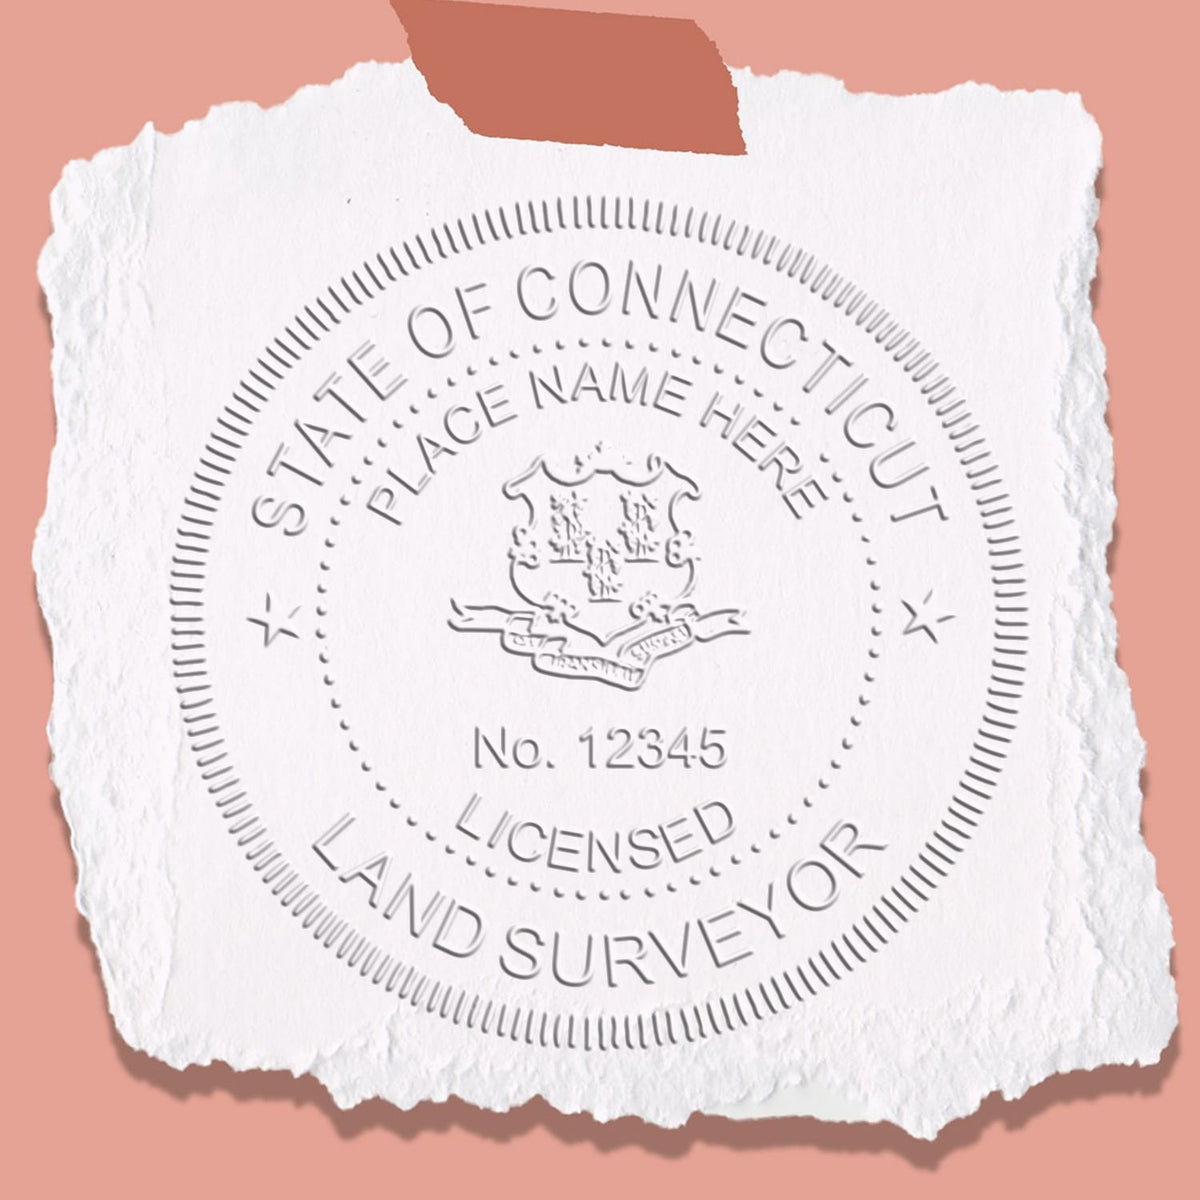 A lifestyle photo showing a stamped image of the Handheld Connecticut Land Surveyor Seal on a piece of paper